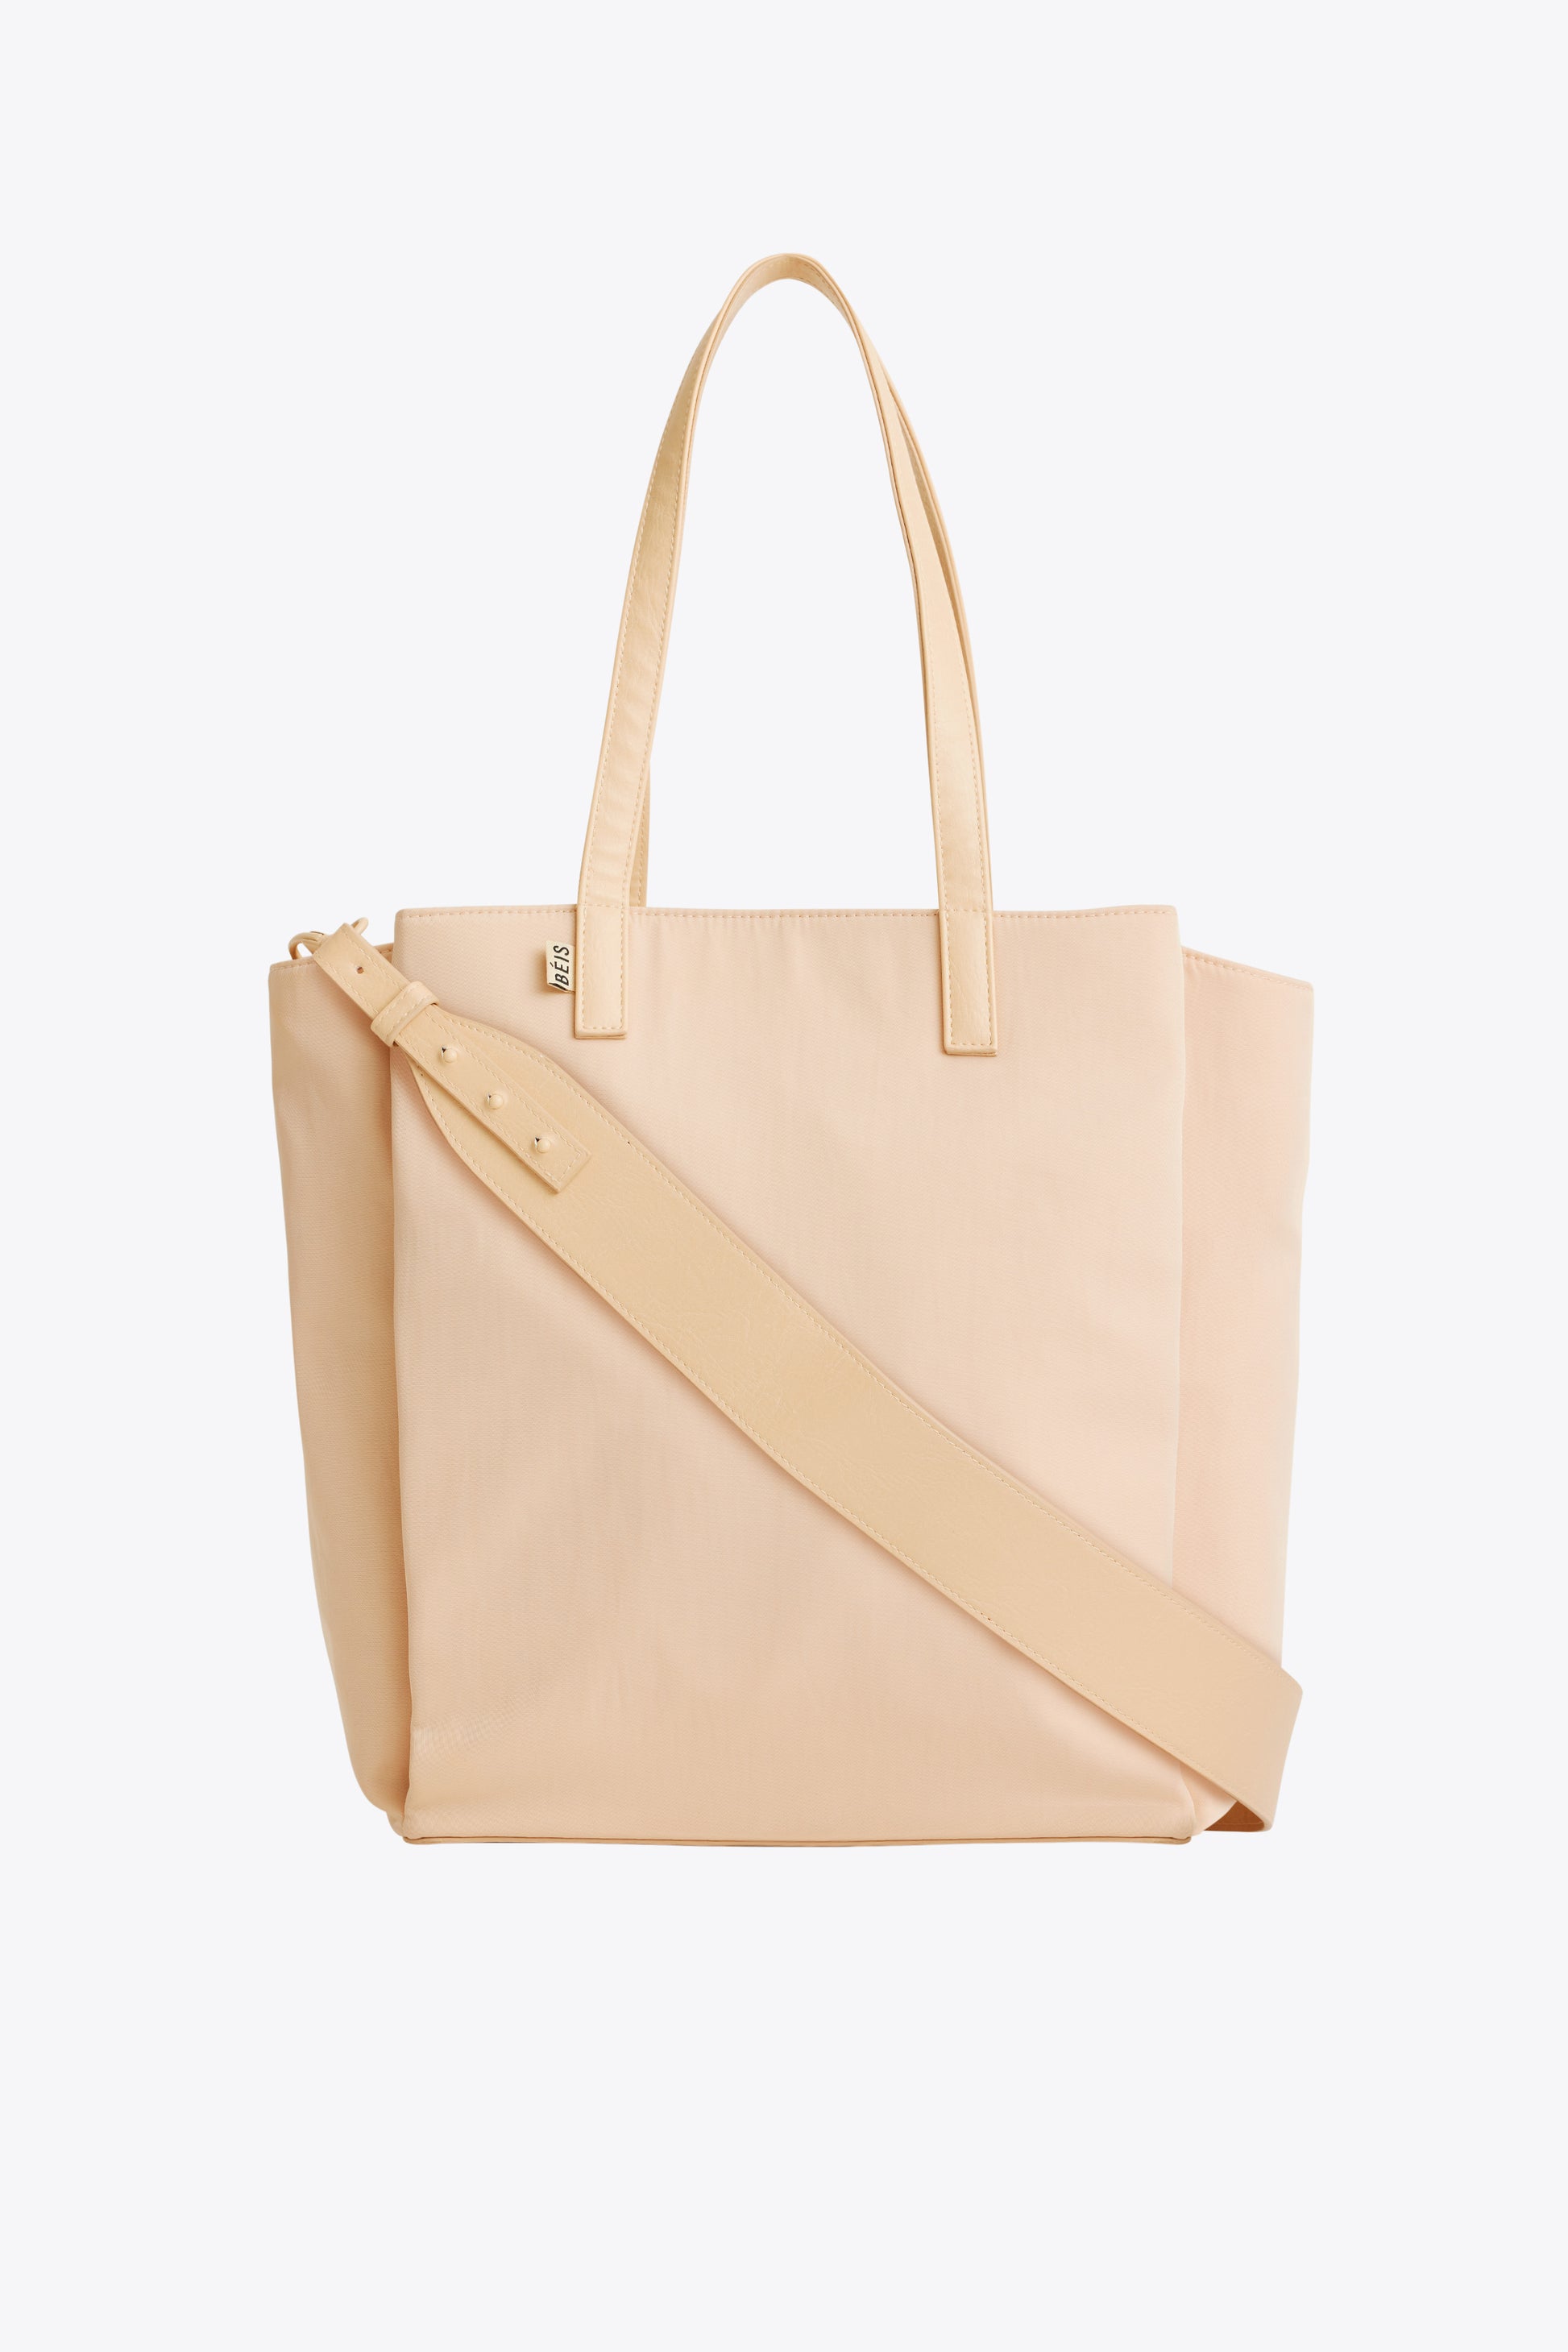 BÉIS 'The Commuter Tote' In Beige - Beige Commuter Tote For Work